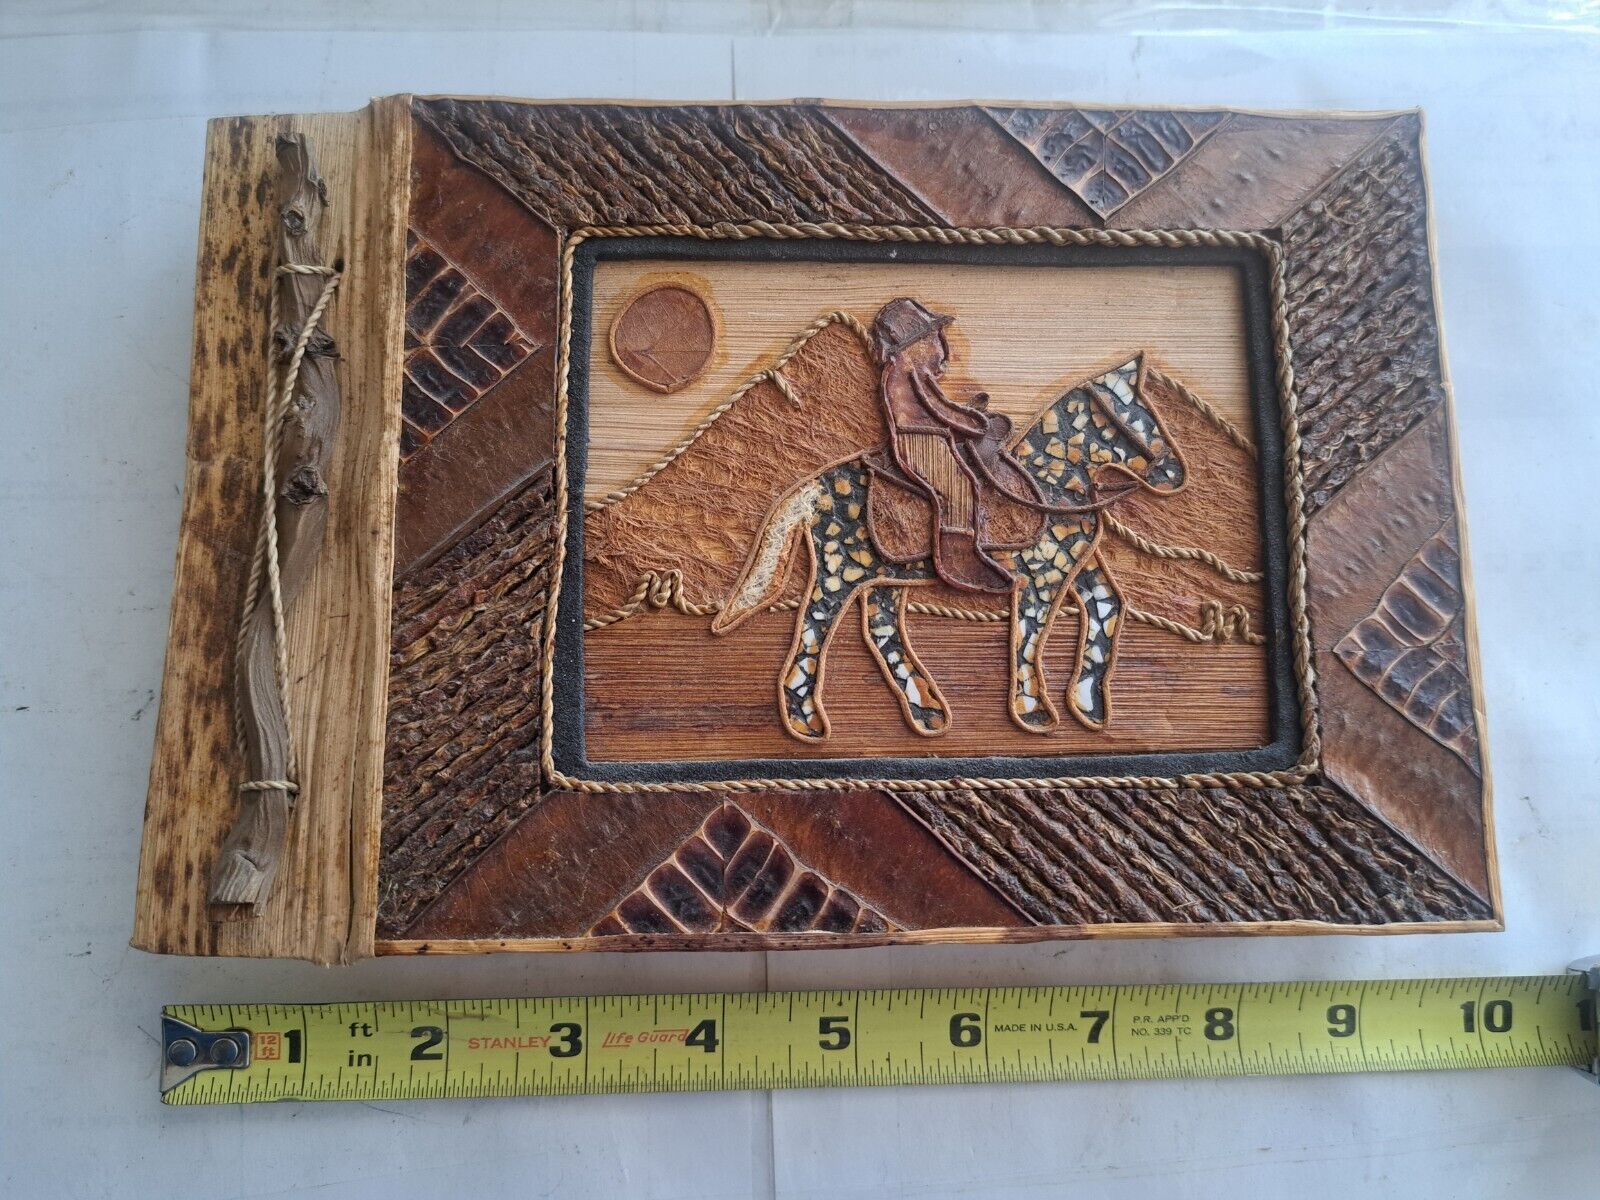 Antique Folk Art Western Themed Photo Album. Awesome Detail Using Natural Mat. 